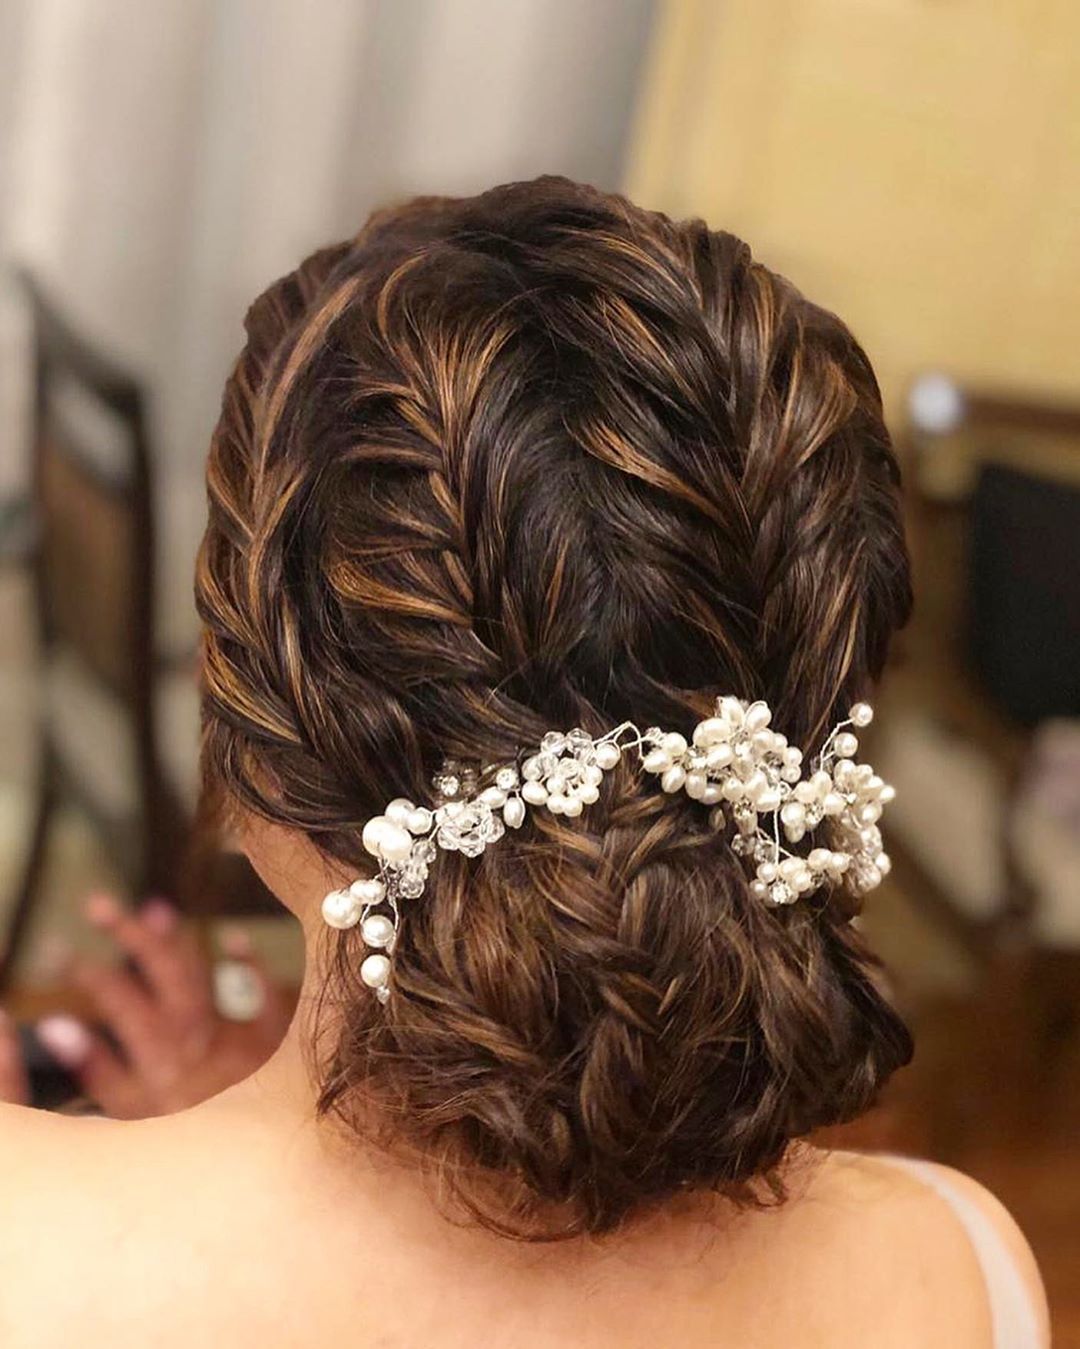 50 Engagement Hairstyles For BridesToBe  Get Inspiring Ideas for  Planning Your Perfect Wedding at fabweddings